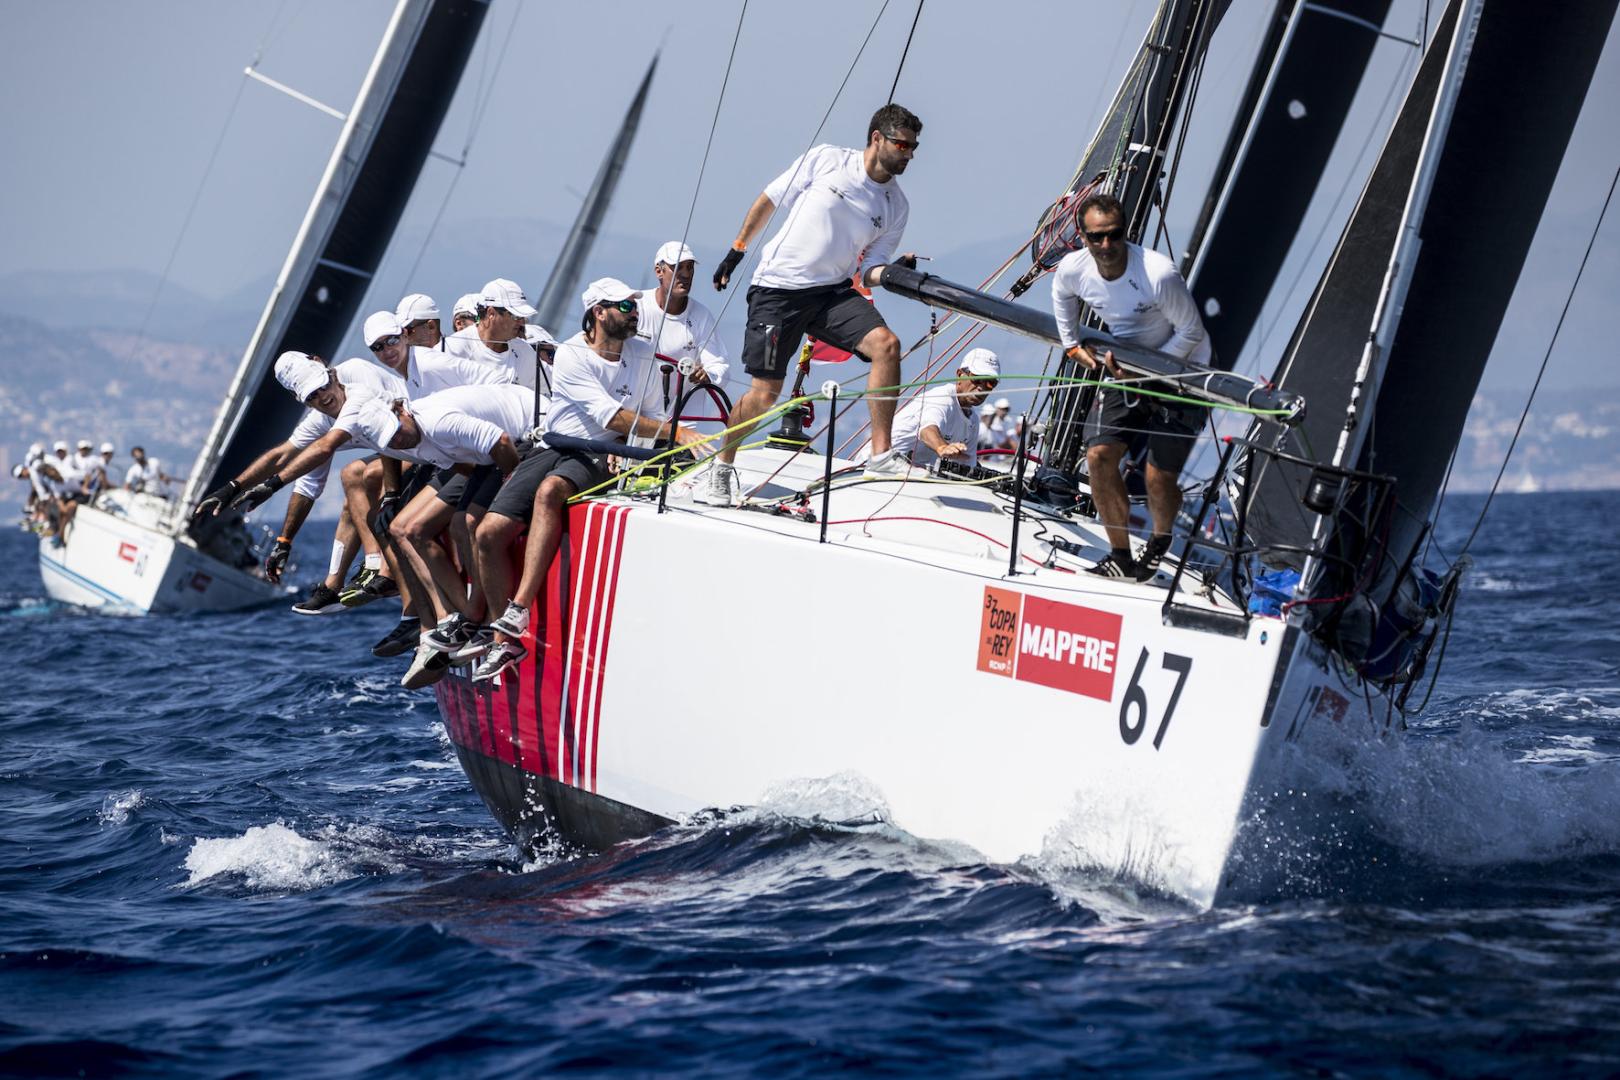 BMW ORC, the largest fleet of the Copa del Rey MAPFRE